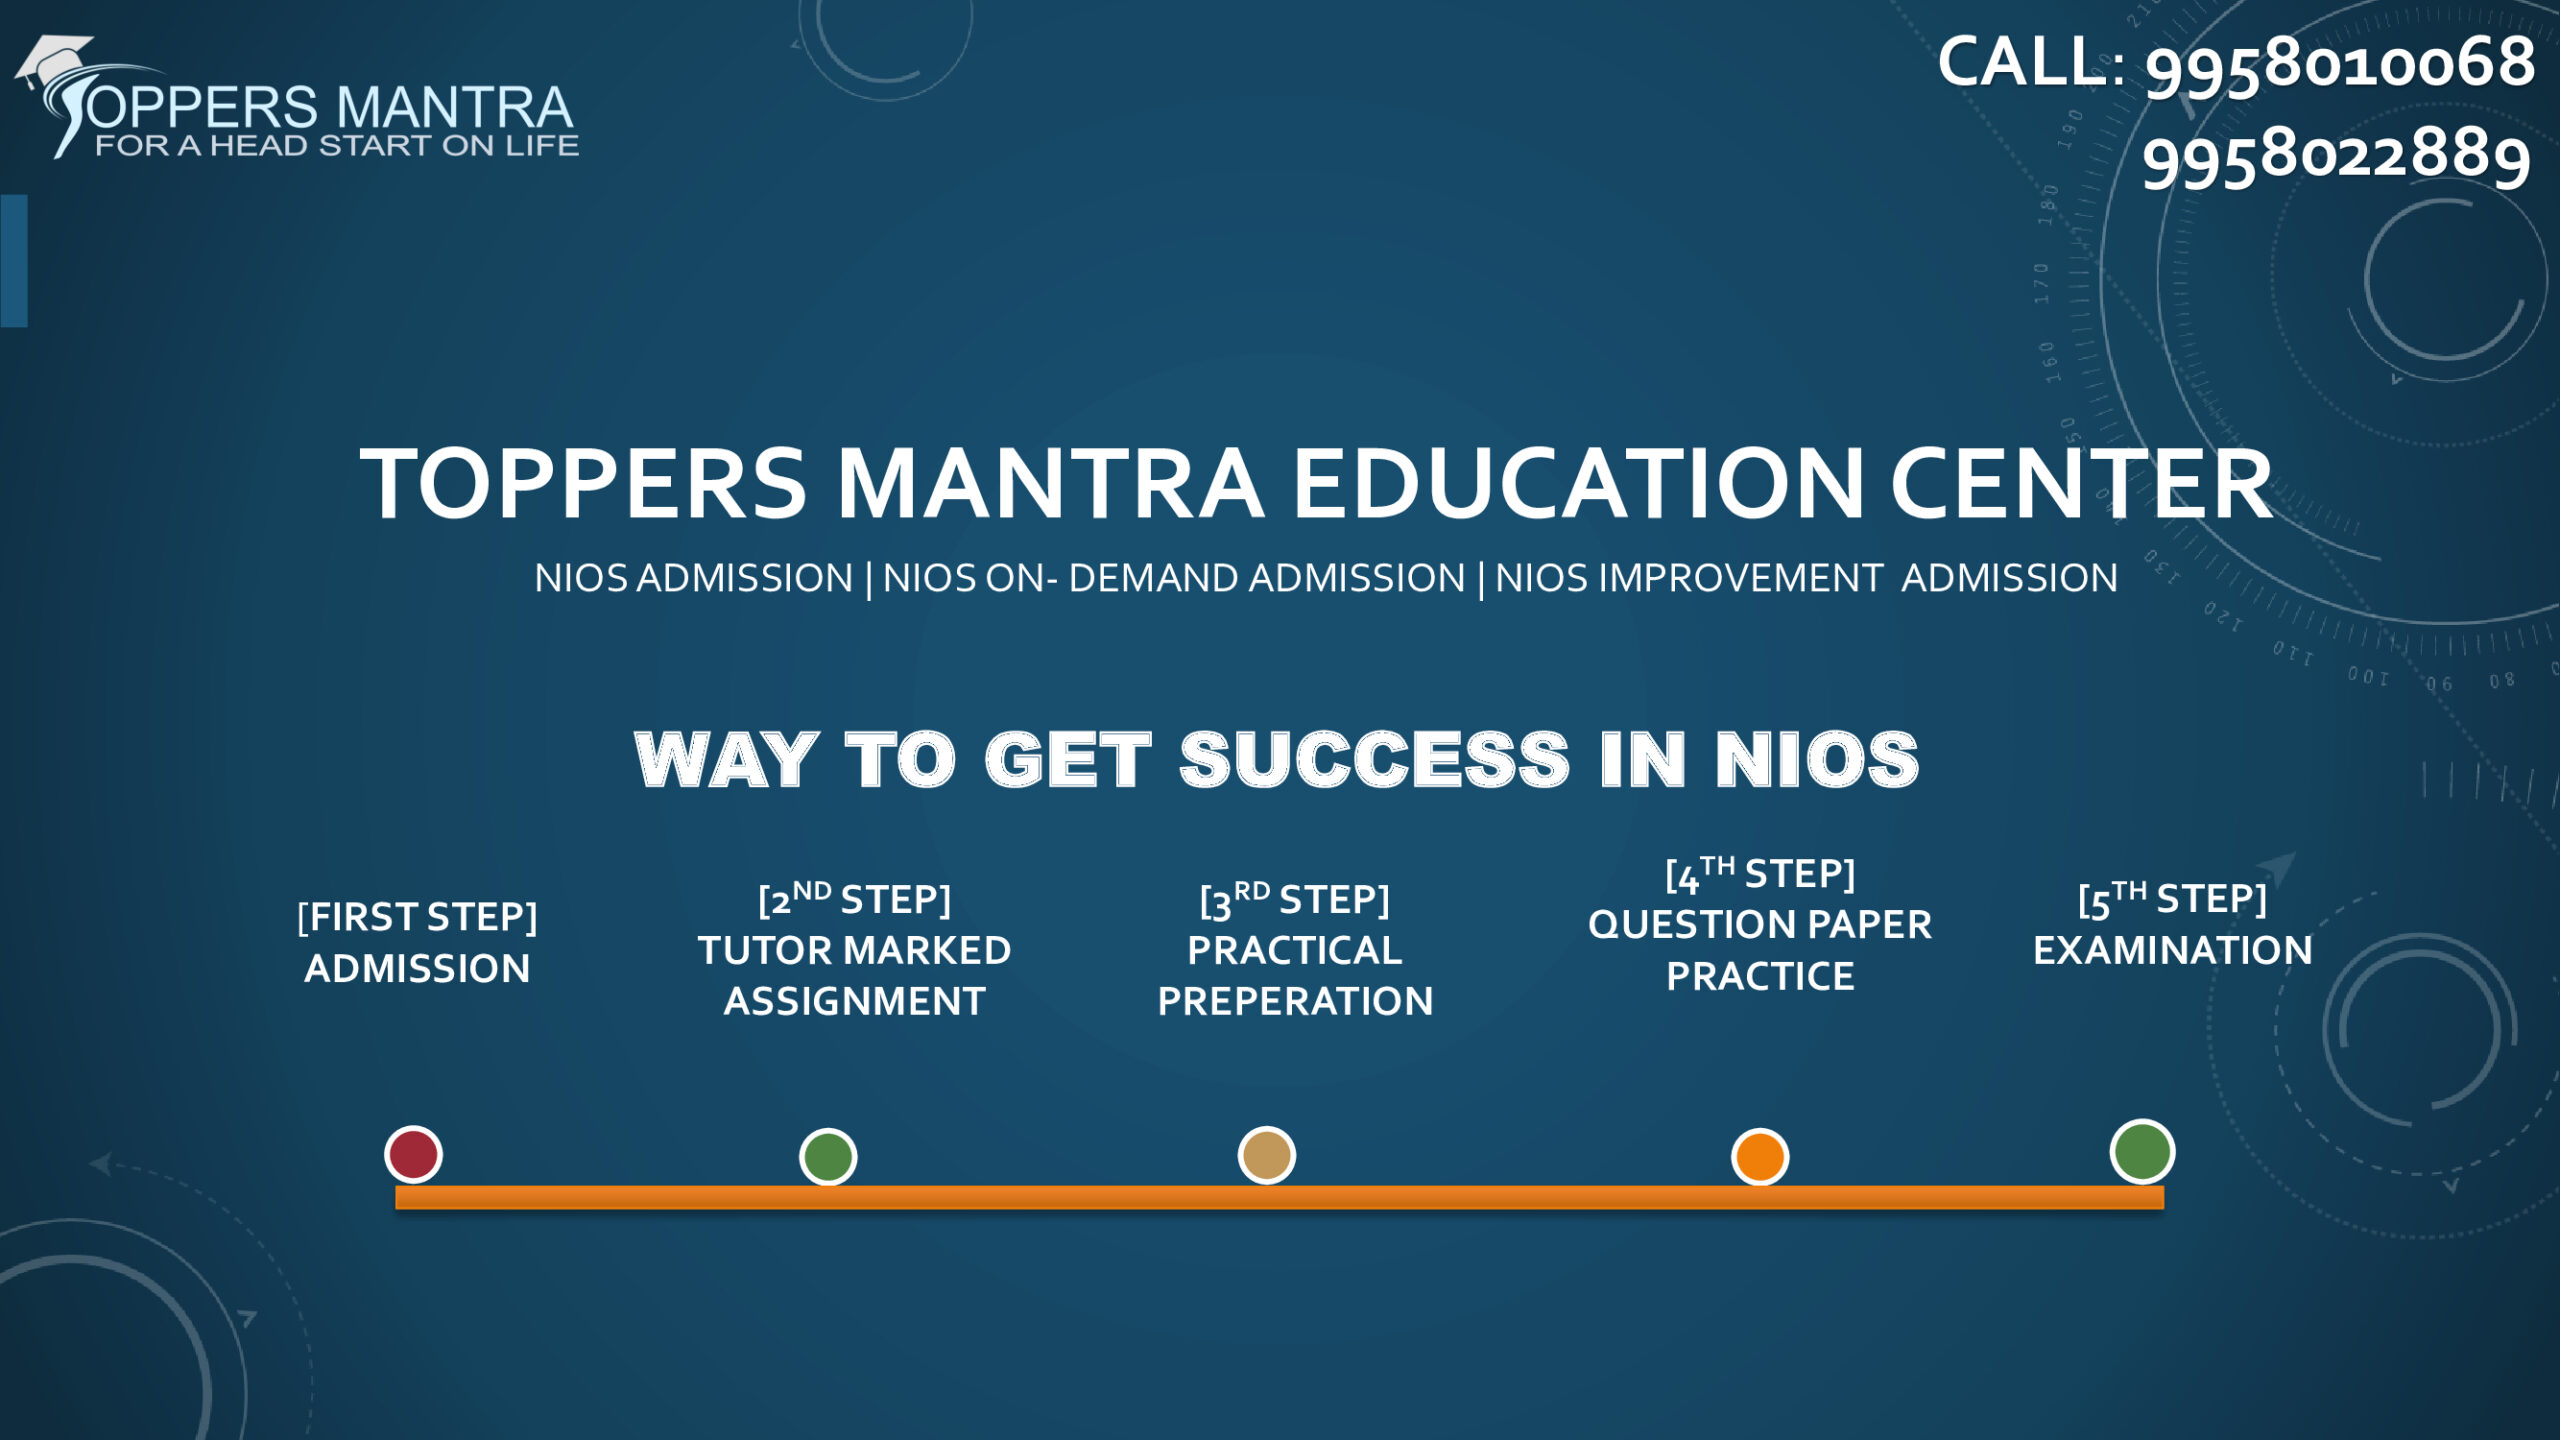 NIOS-ADMISSION-TOPPERS-MANTRA-EDUCATION-CENTER-WAY-TO-GET-ADMISSION-IN-NIOS